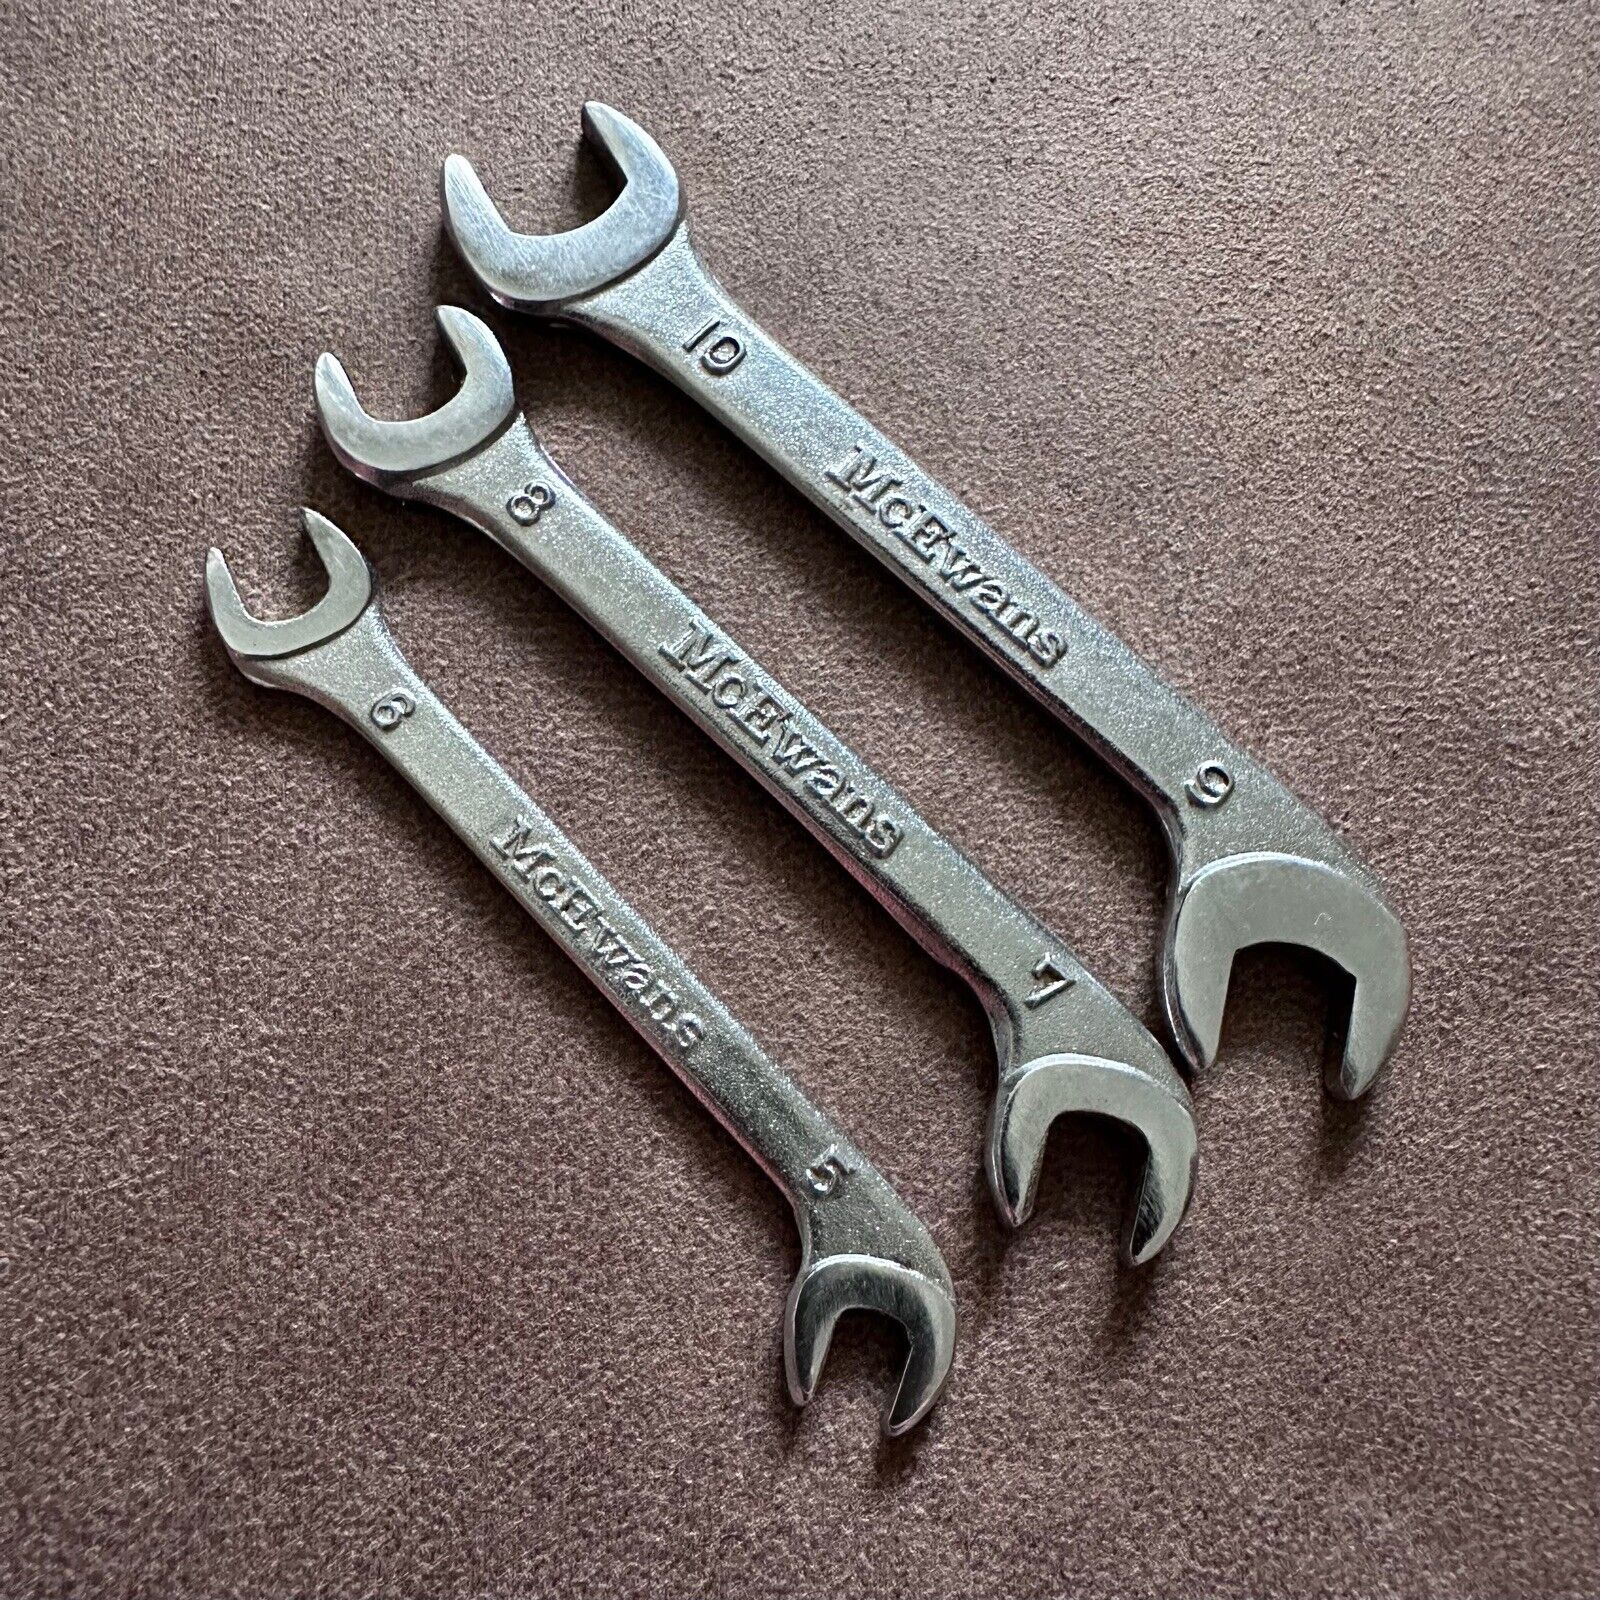 3x VINTAGE McEWANS OFFSET IGNITION SPANNERS 5mm - 10mm METRIC MADE IN JAPAN